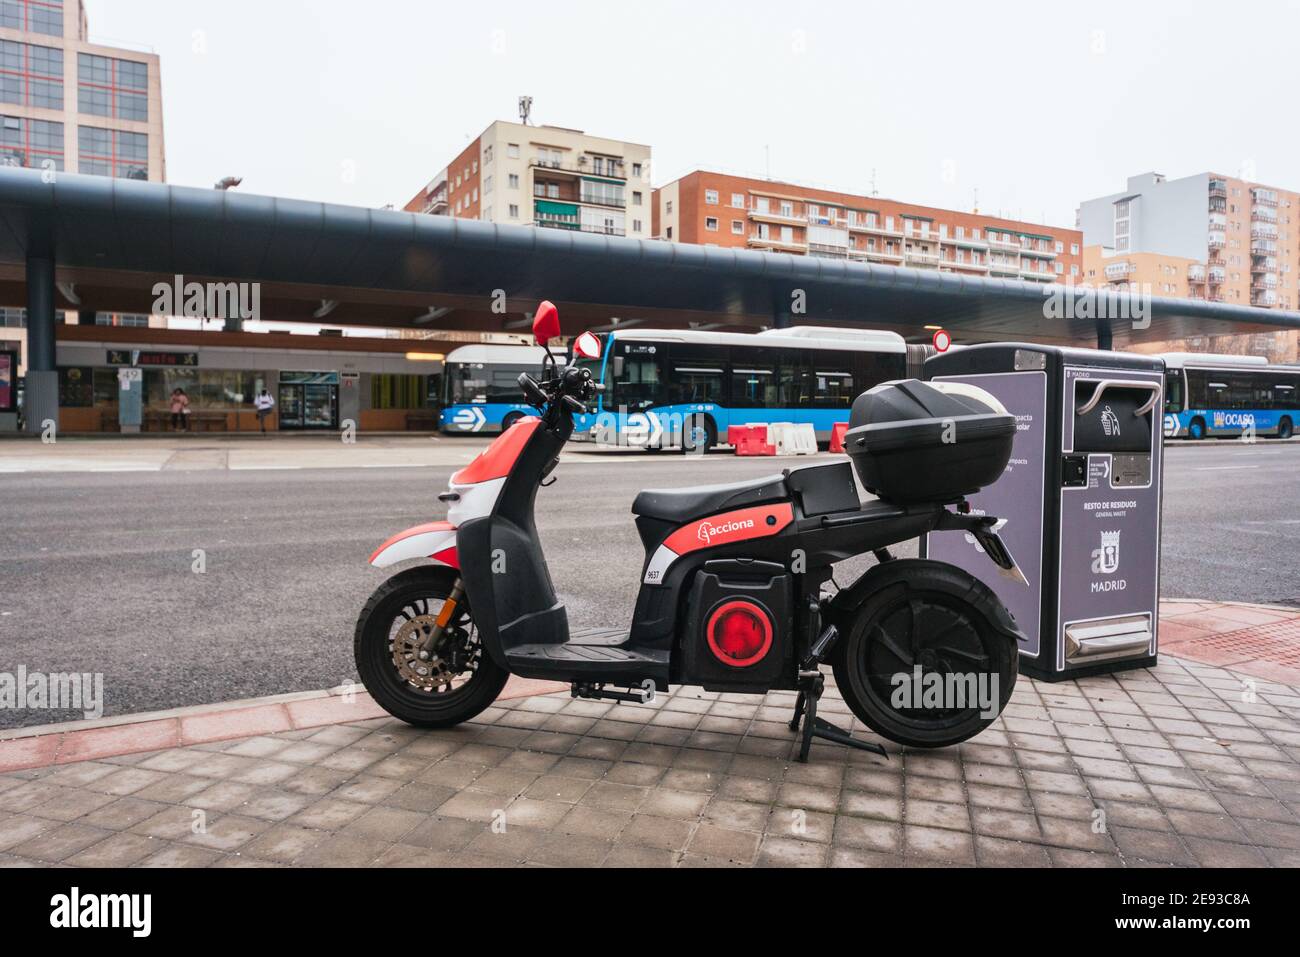 MADRID, SPAIN - Jan 29, Electric scooter parked in the street. Acciona is a Spanish company for rental systems Photo - Alamy